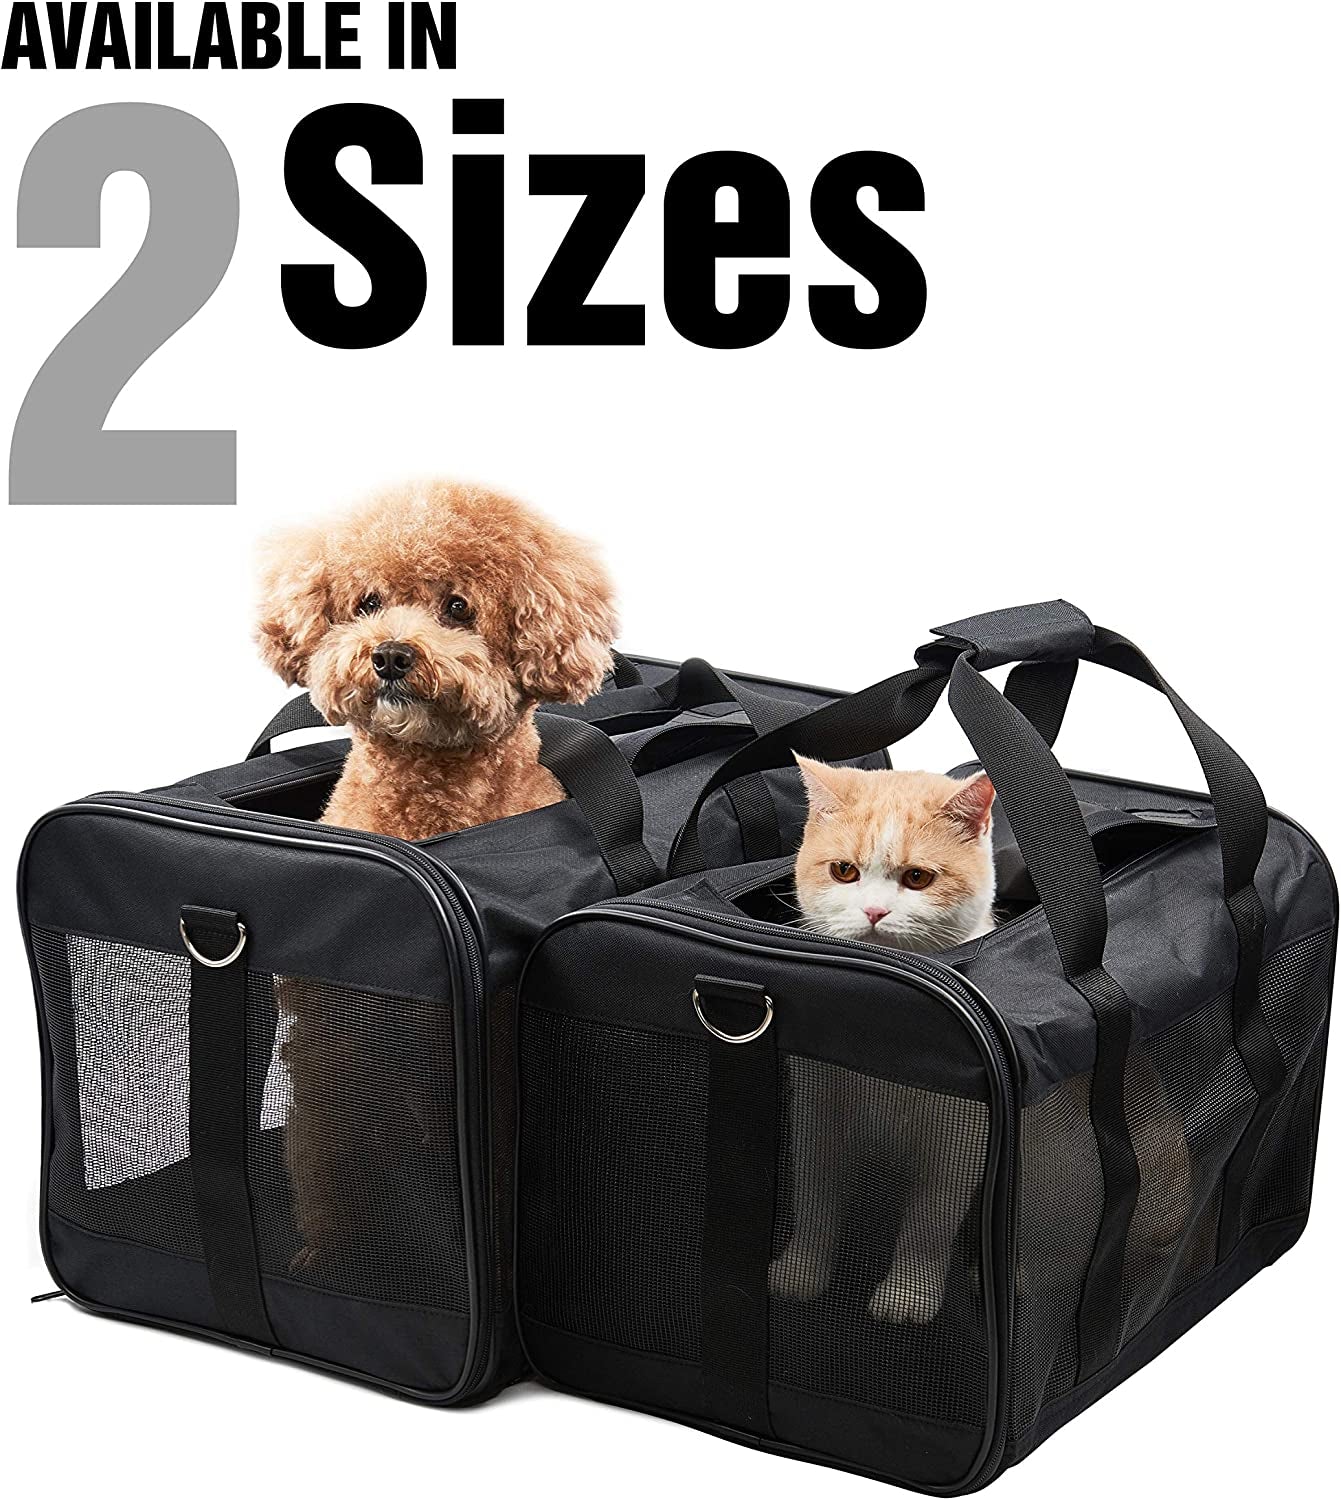 Scratchme Pet Travel Carrier Soft Sided Portable Bag for Cats, Small Dogs, Kittens or Puppies, Collapsible, Durable, Airline Approved, Travel Friendly, Carry Your Pet with You Safely and Comfortably